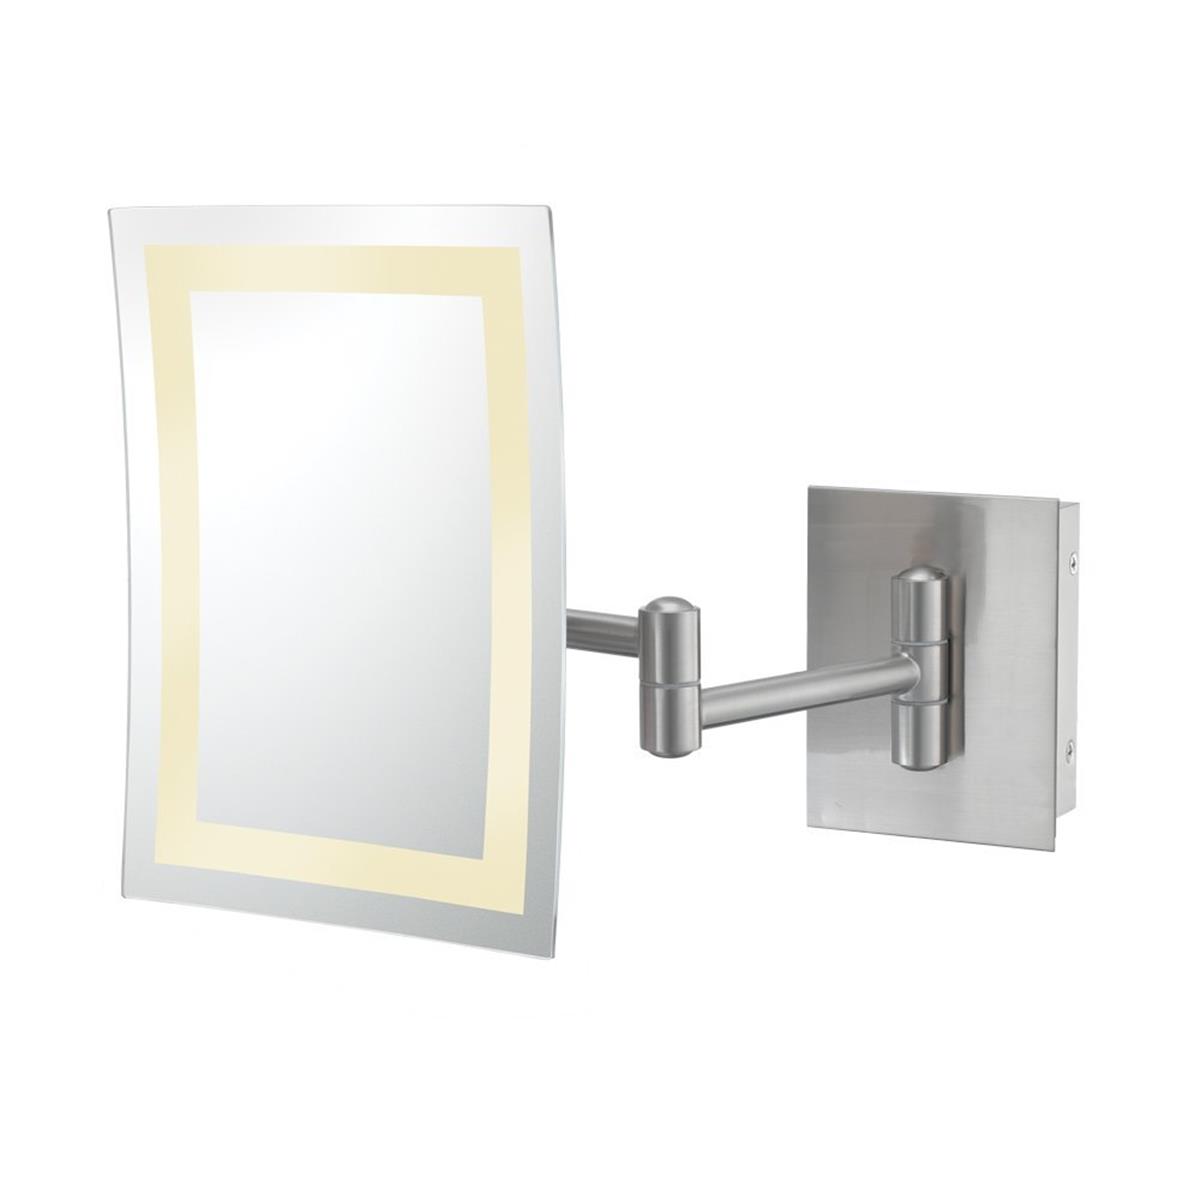 Aptations 713-55-83 Single-sided Led Square Freestanding Mirror - Rechargeable, Polished Nickel